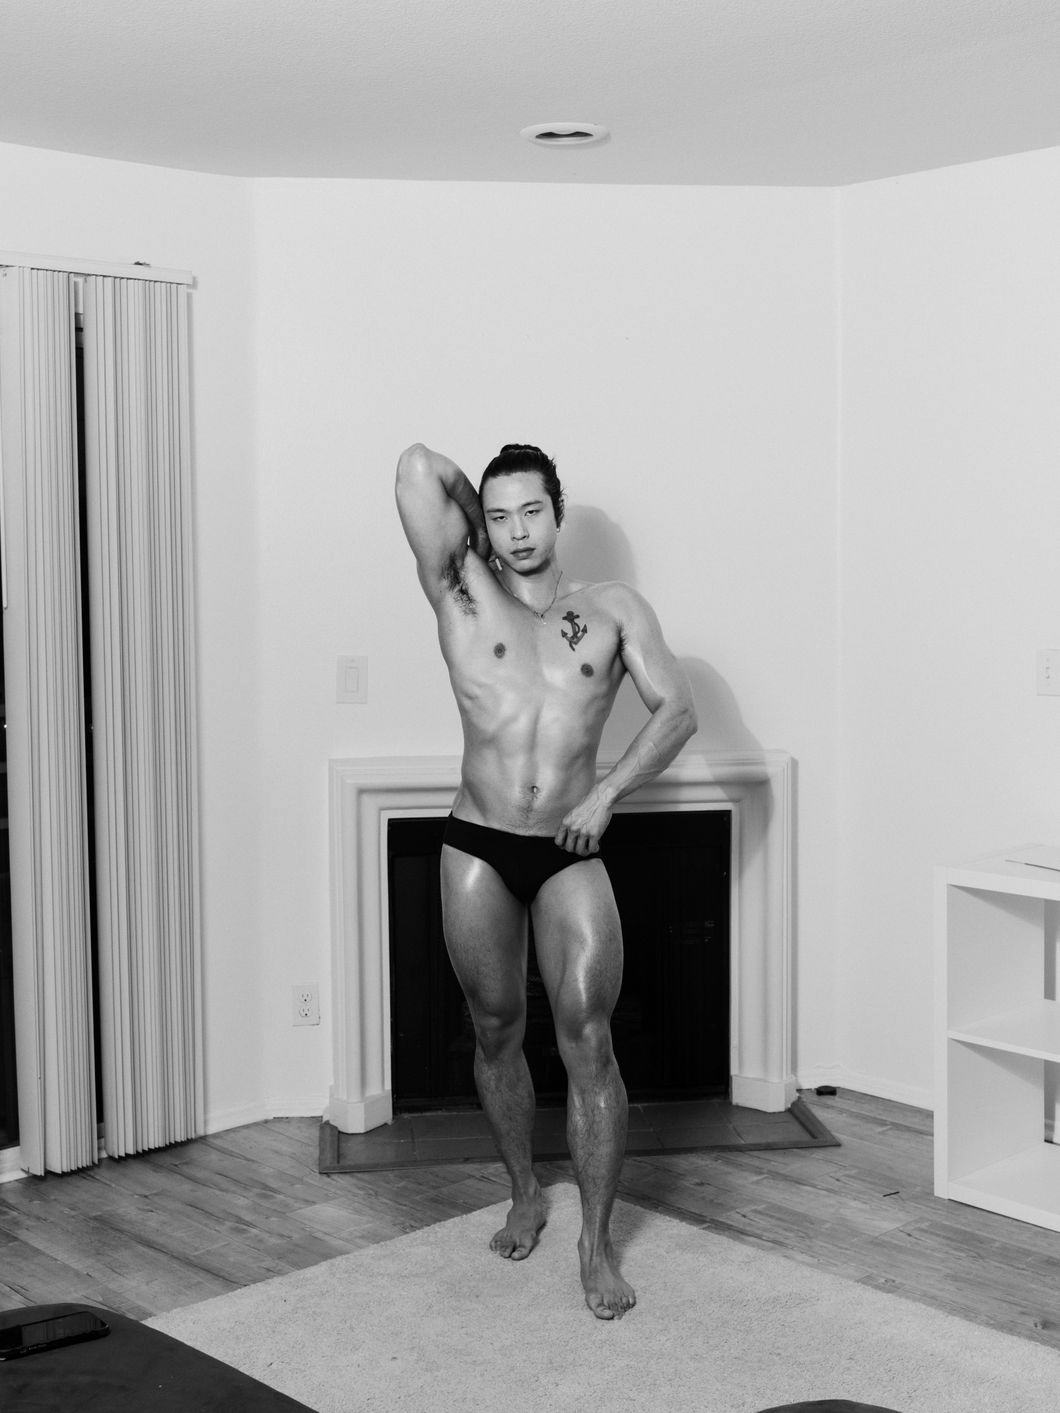 Black and white portrait of a man, with an Asian appearance, and trained physique. They pose with one arm stretched upwards and back, revealing the right armpit and tattooed chest. They stand in a living room in front of an empty fire place, on a rug © Ricardo Nagaoka